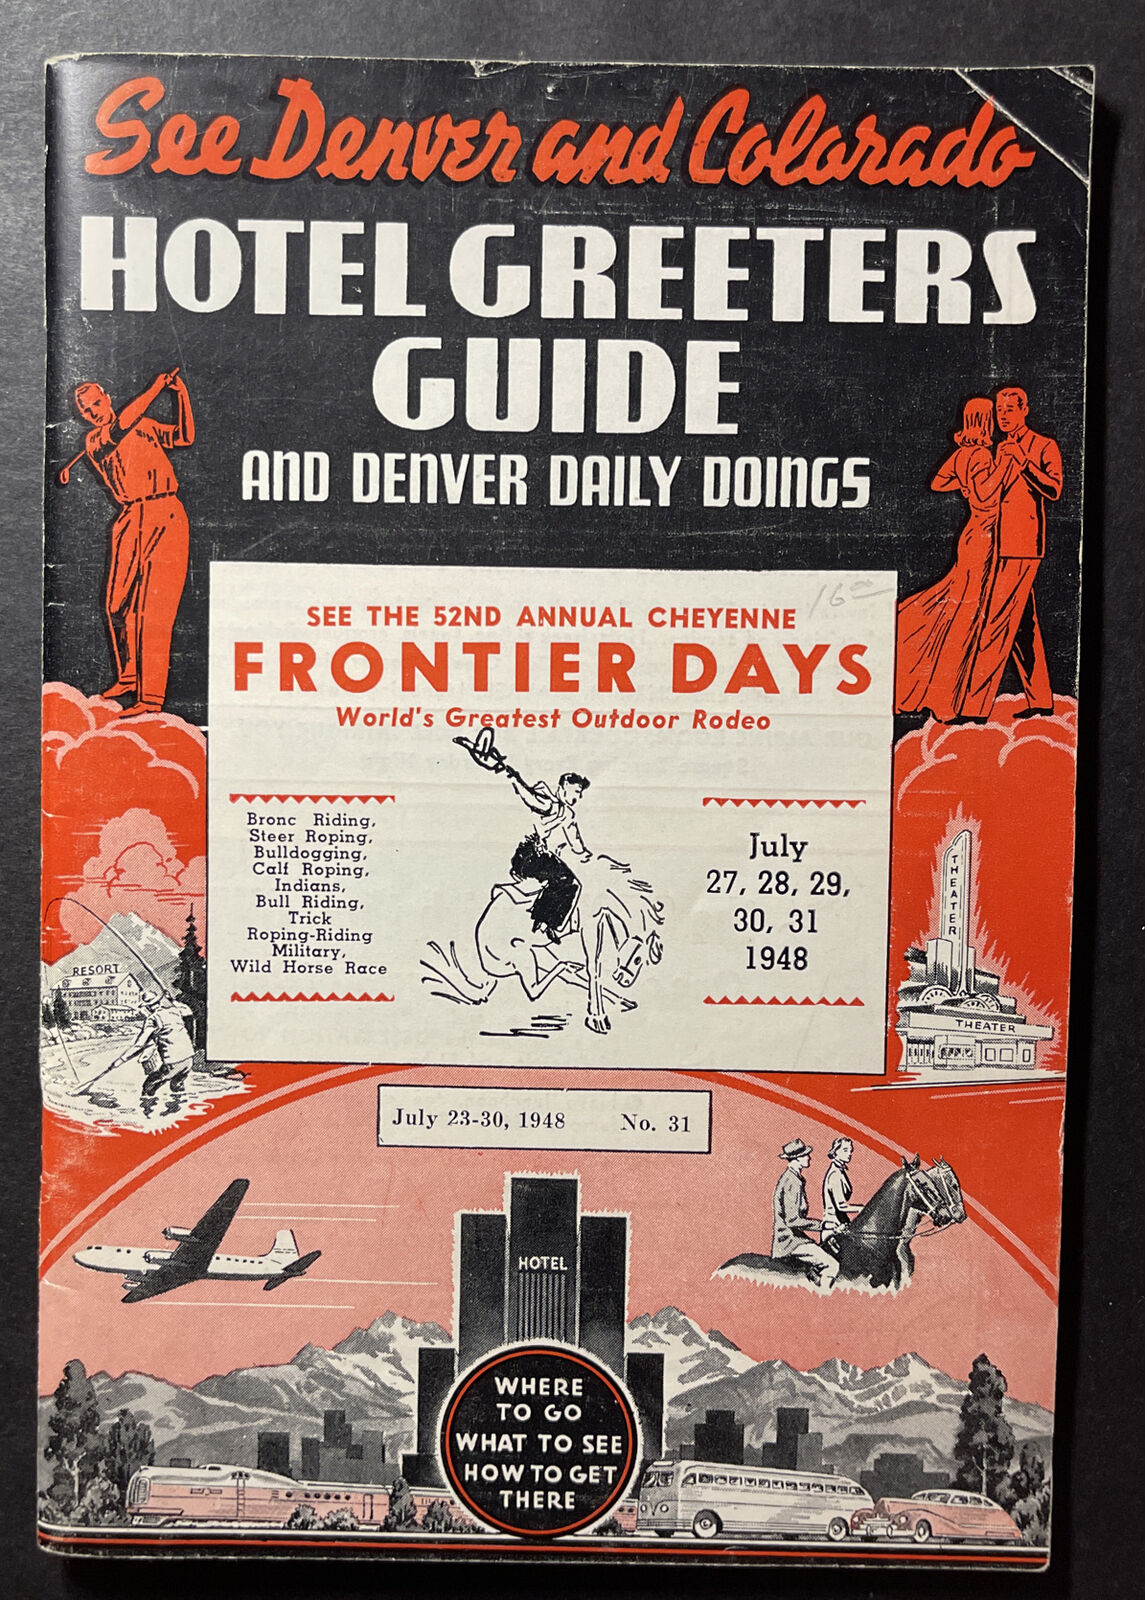 Denver and Colorado Hotel Greeters Guide July 30-31 1948 No 31 Frontier Days WY